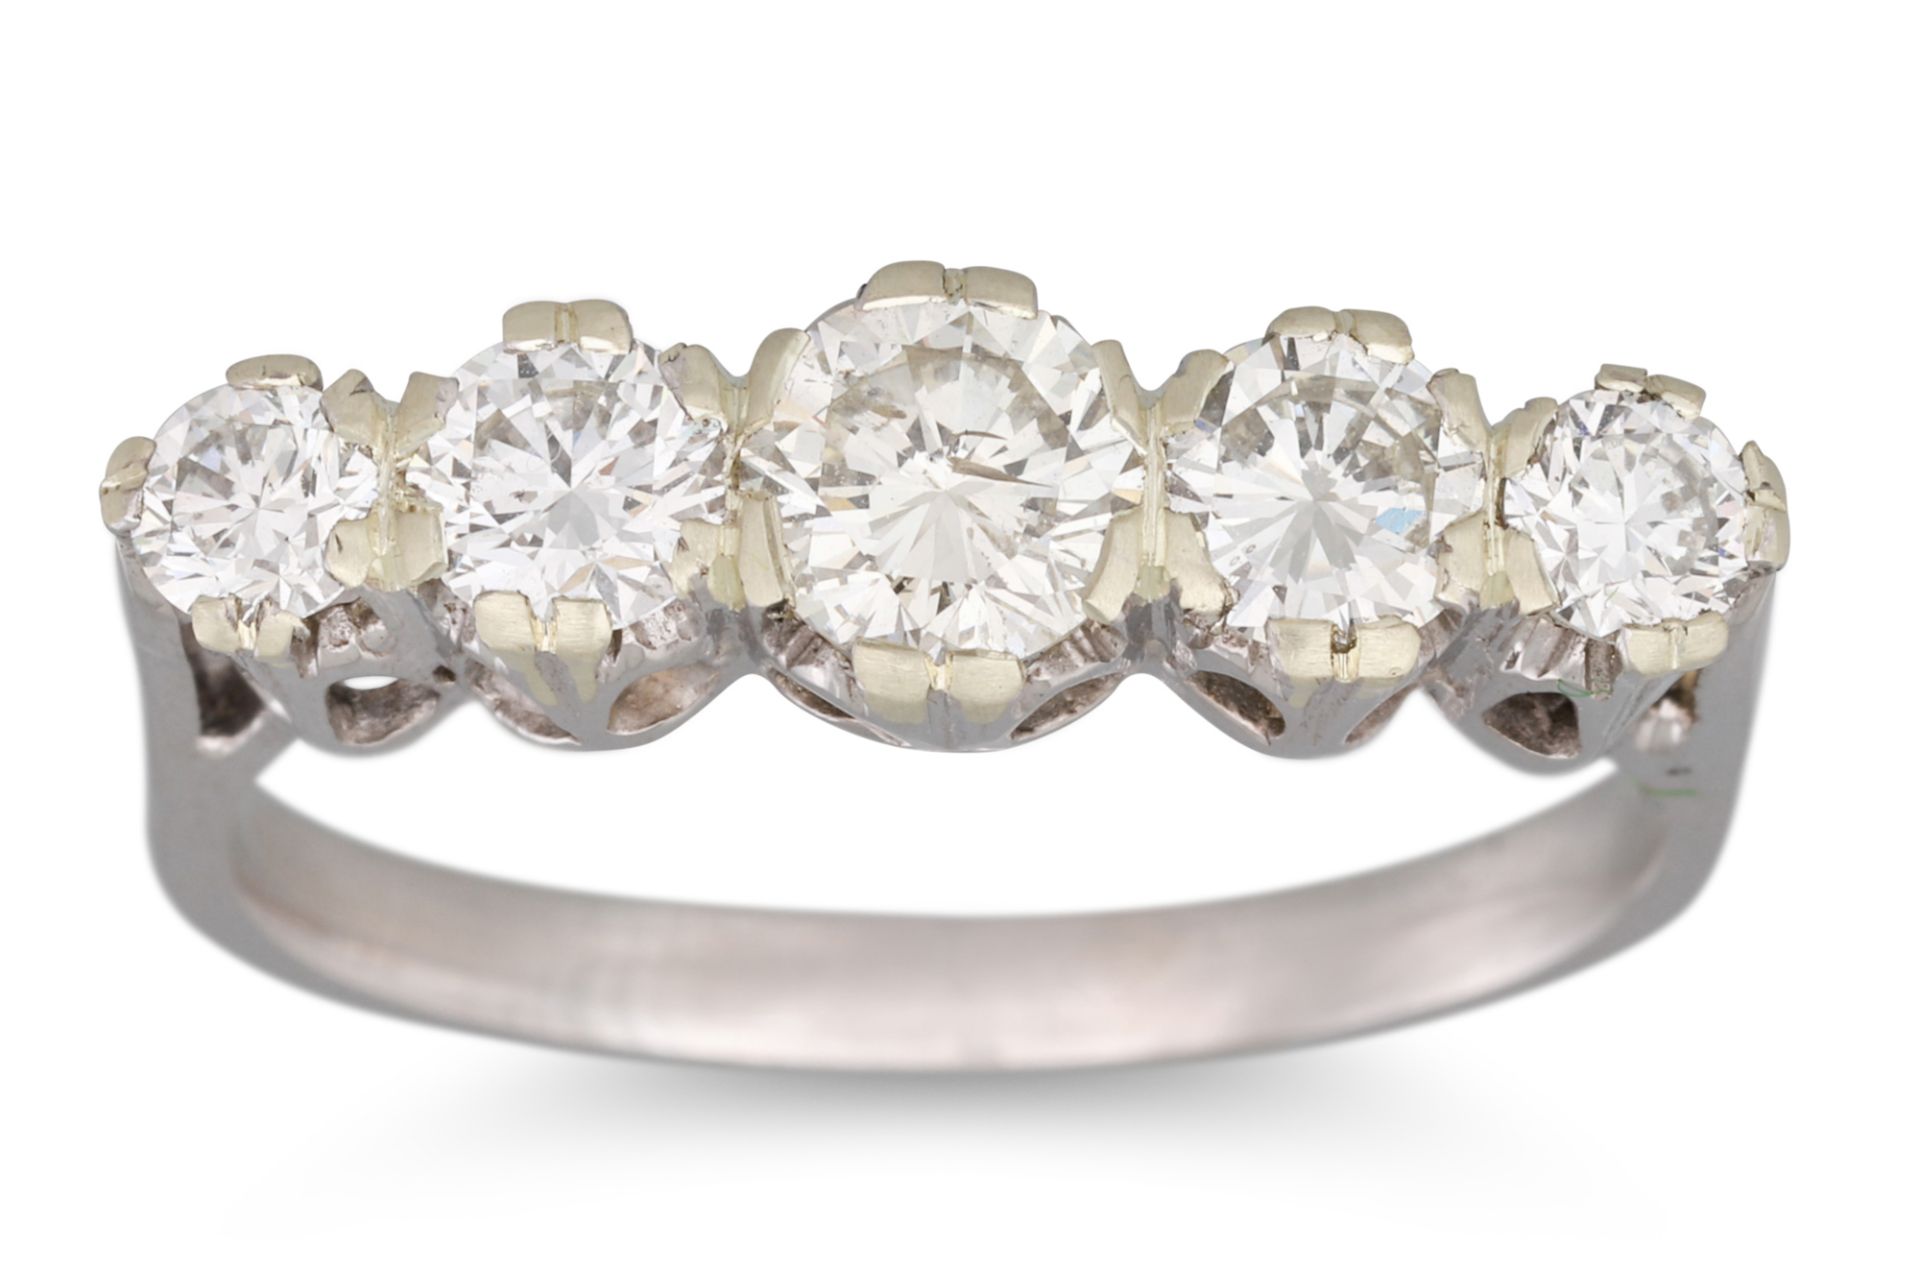 A DIAMOND FIVE STONE RING, the brilliant cut diamond mounted in 18ct white gold. Estimated: weight